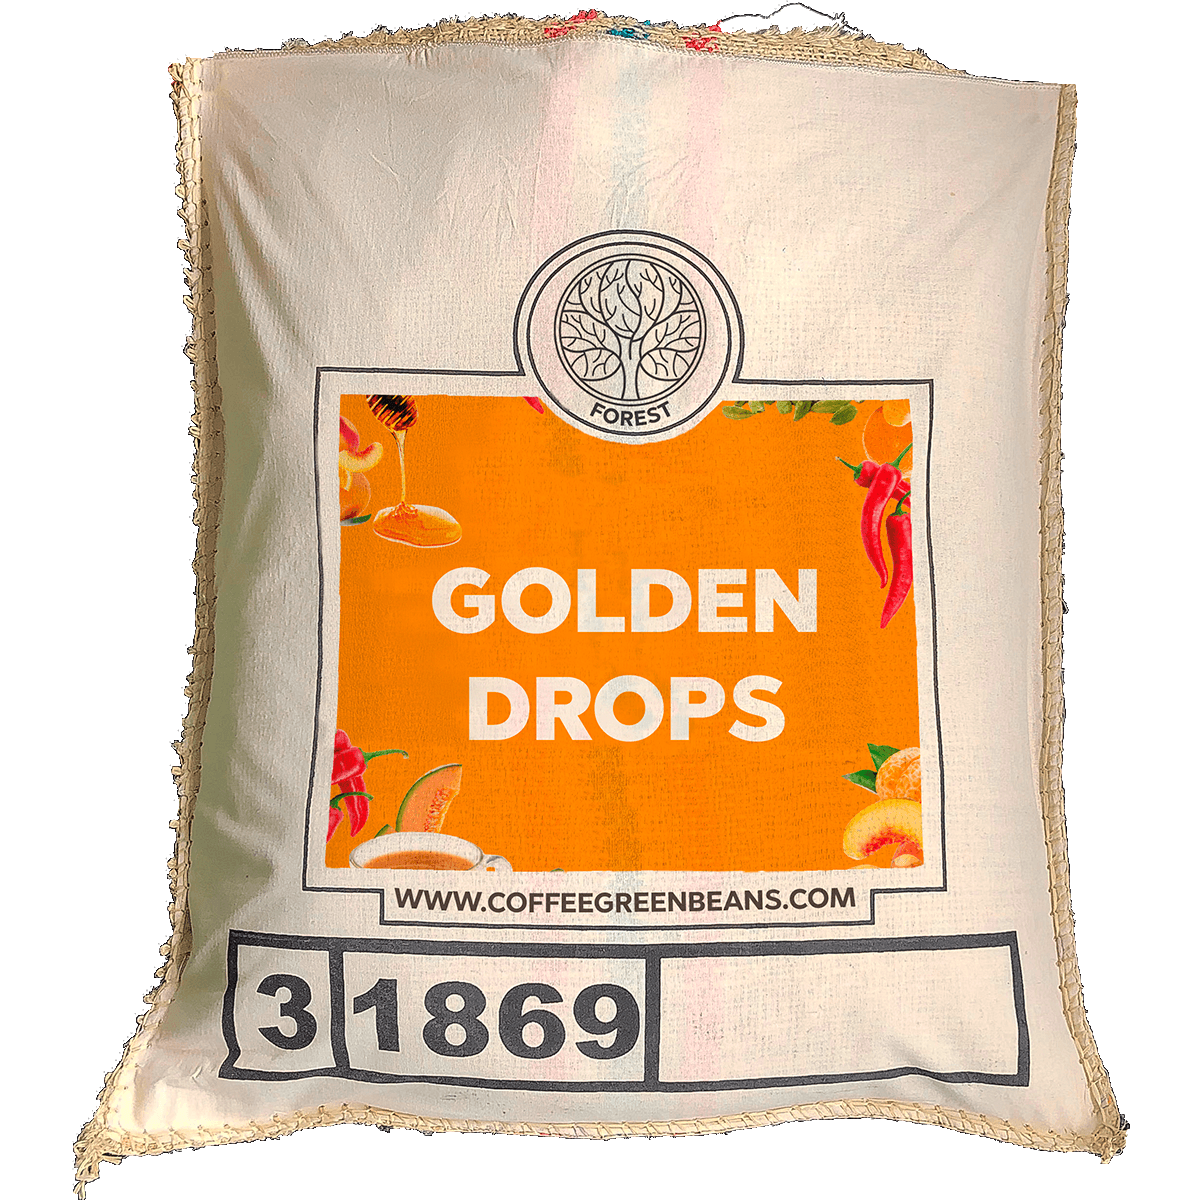 GOLDEN DROPS - Forest Coffee 